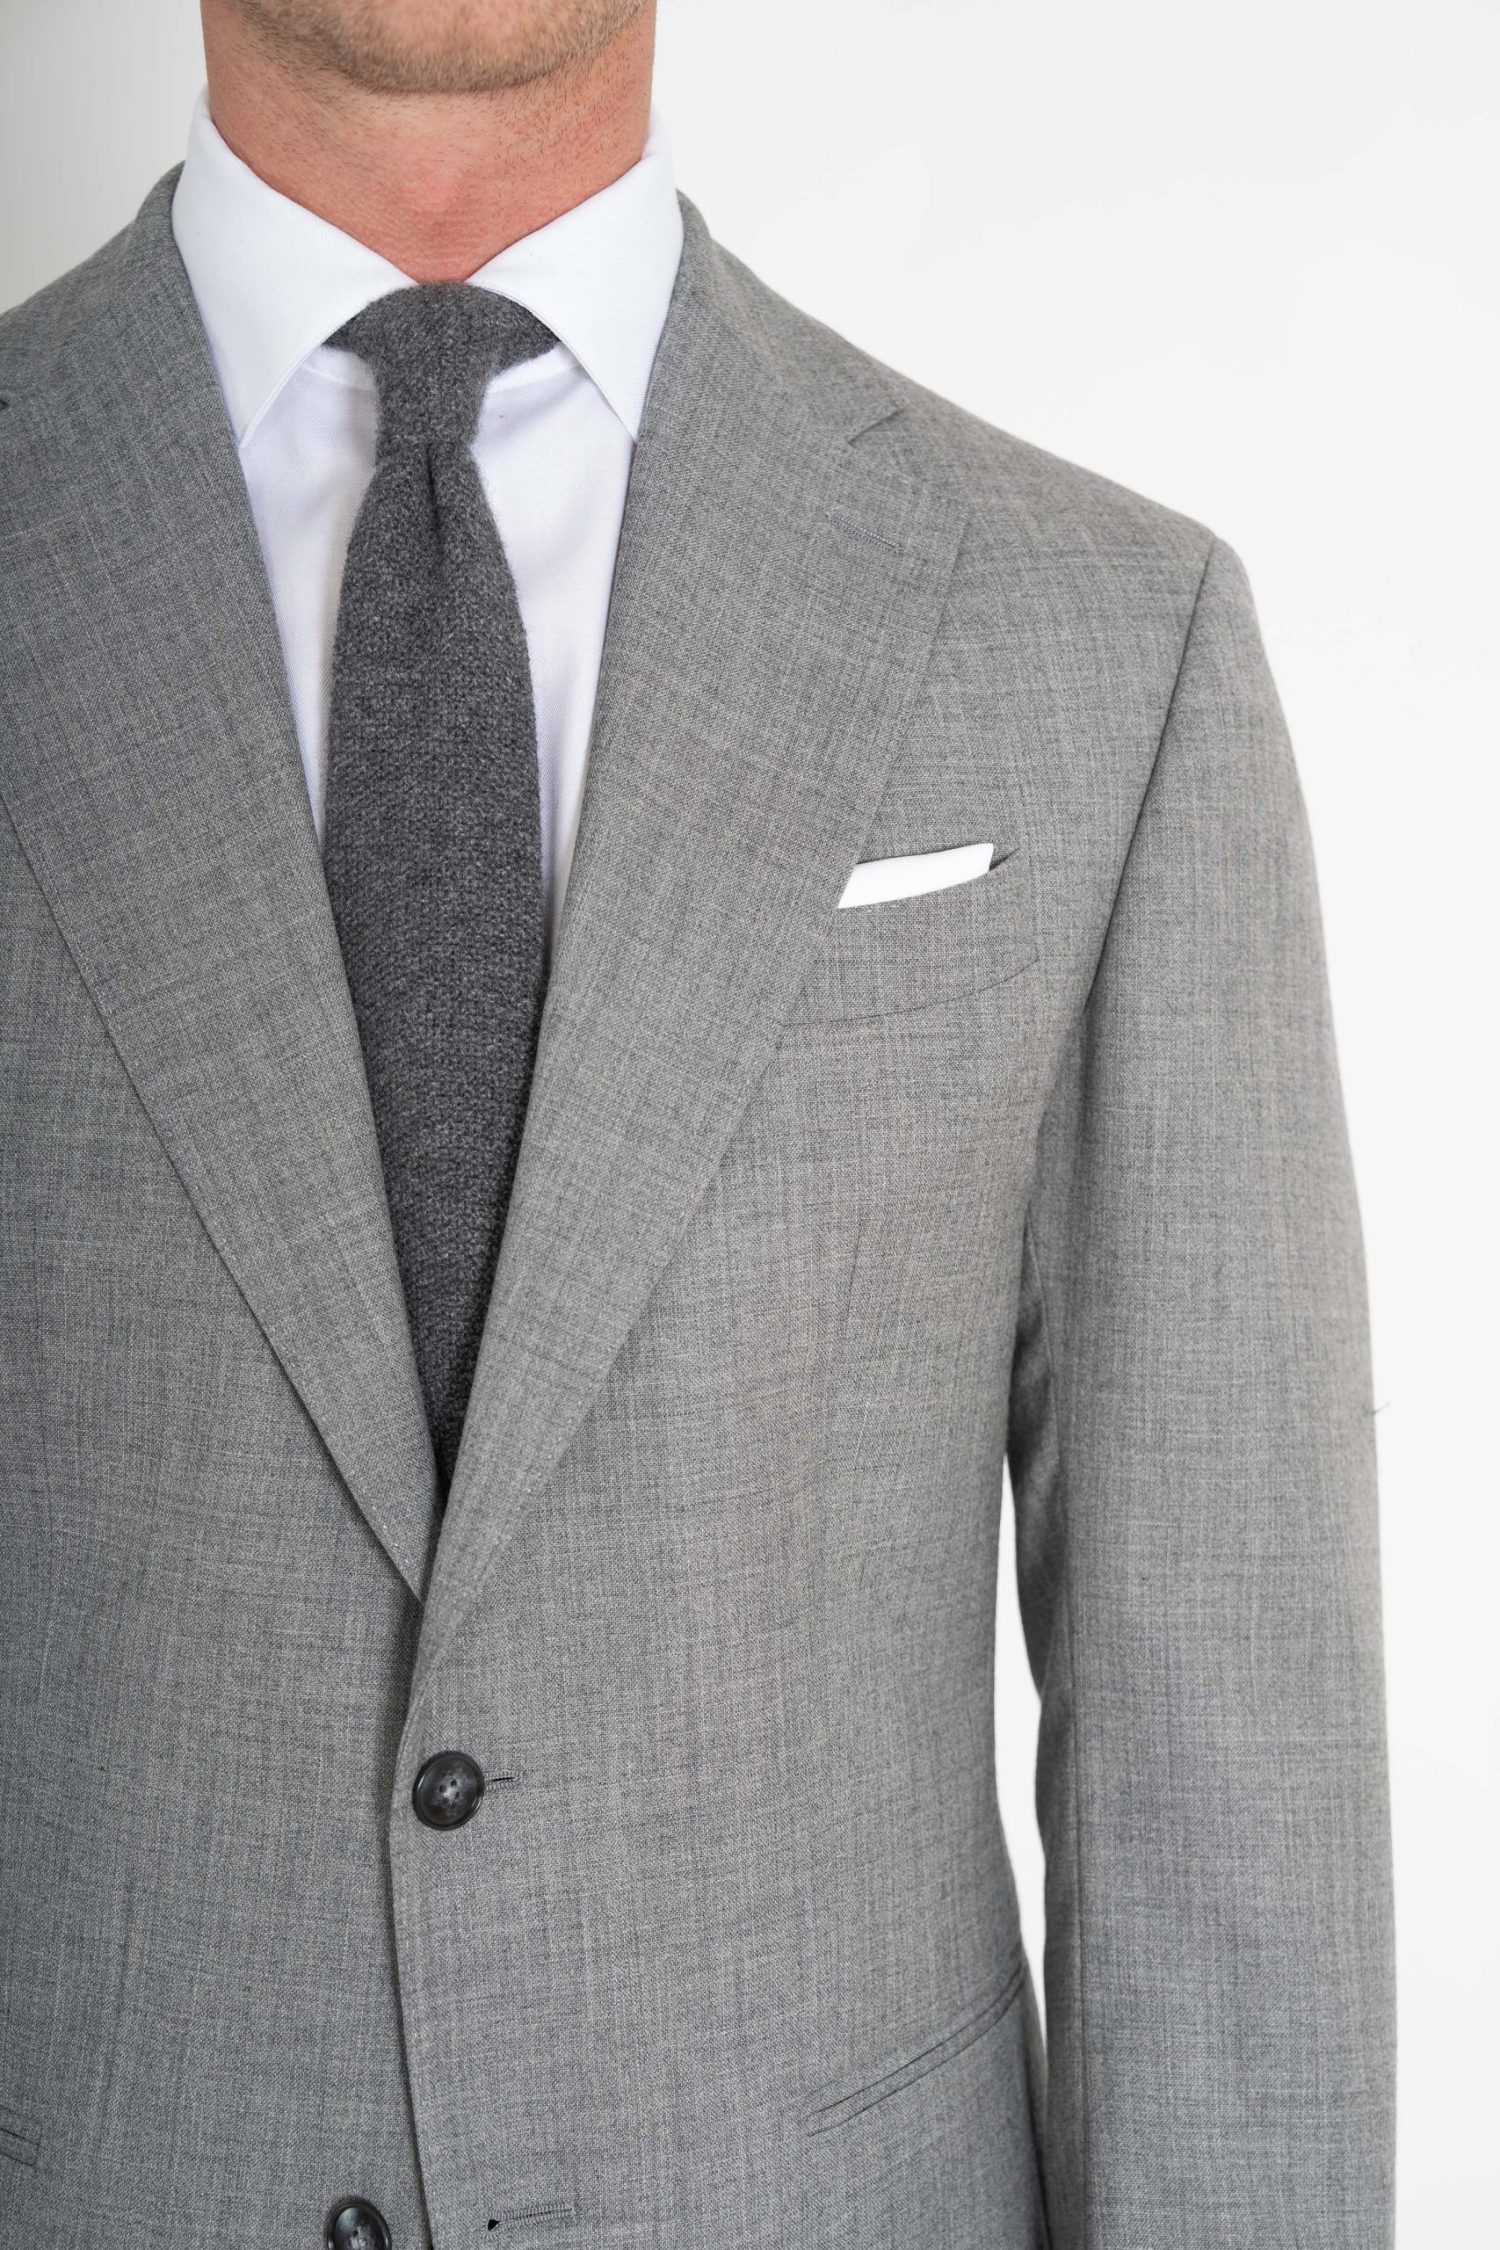 light grey suit in twistair fabric by mond